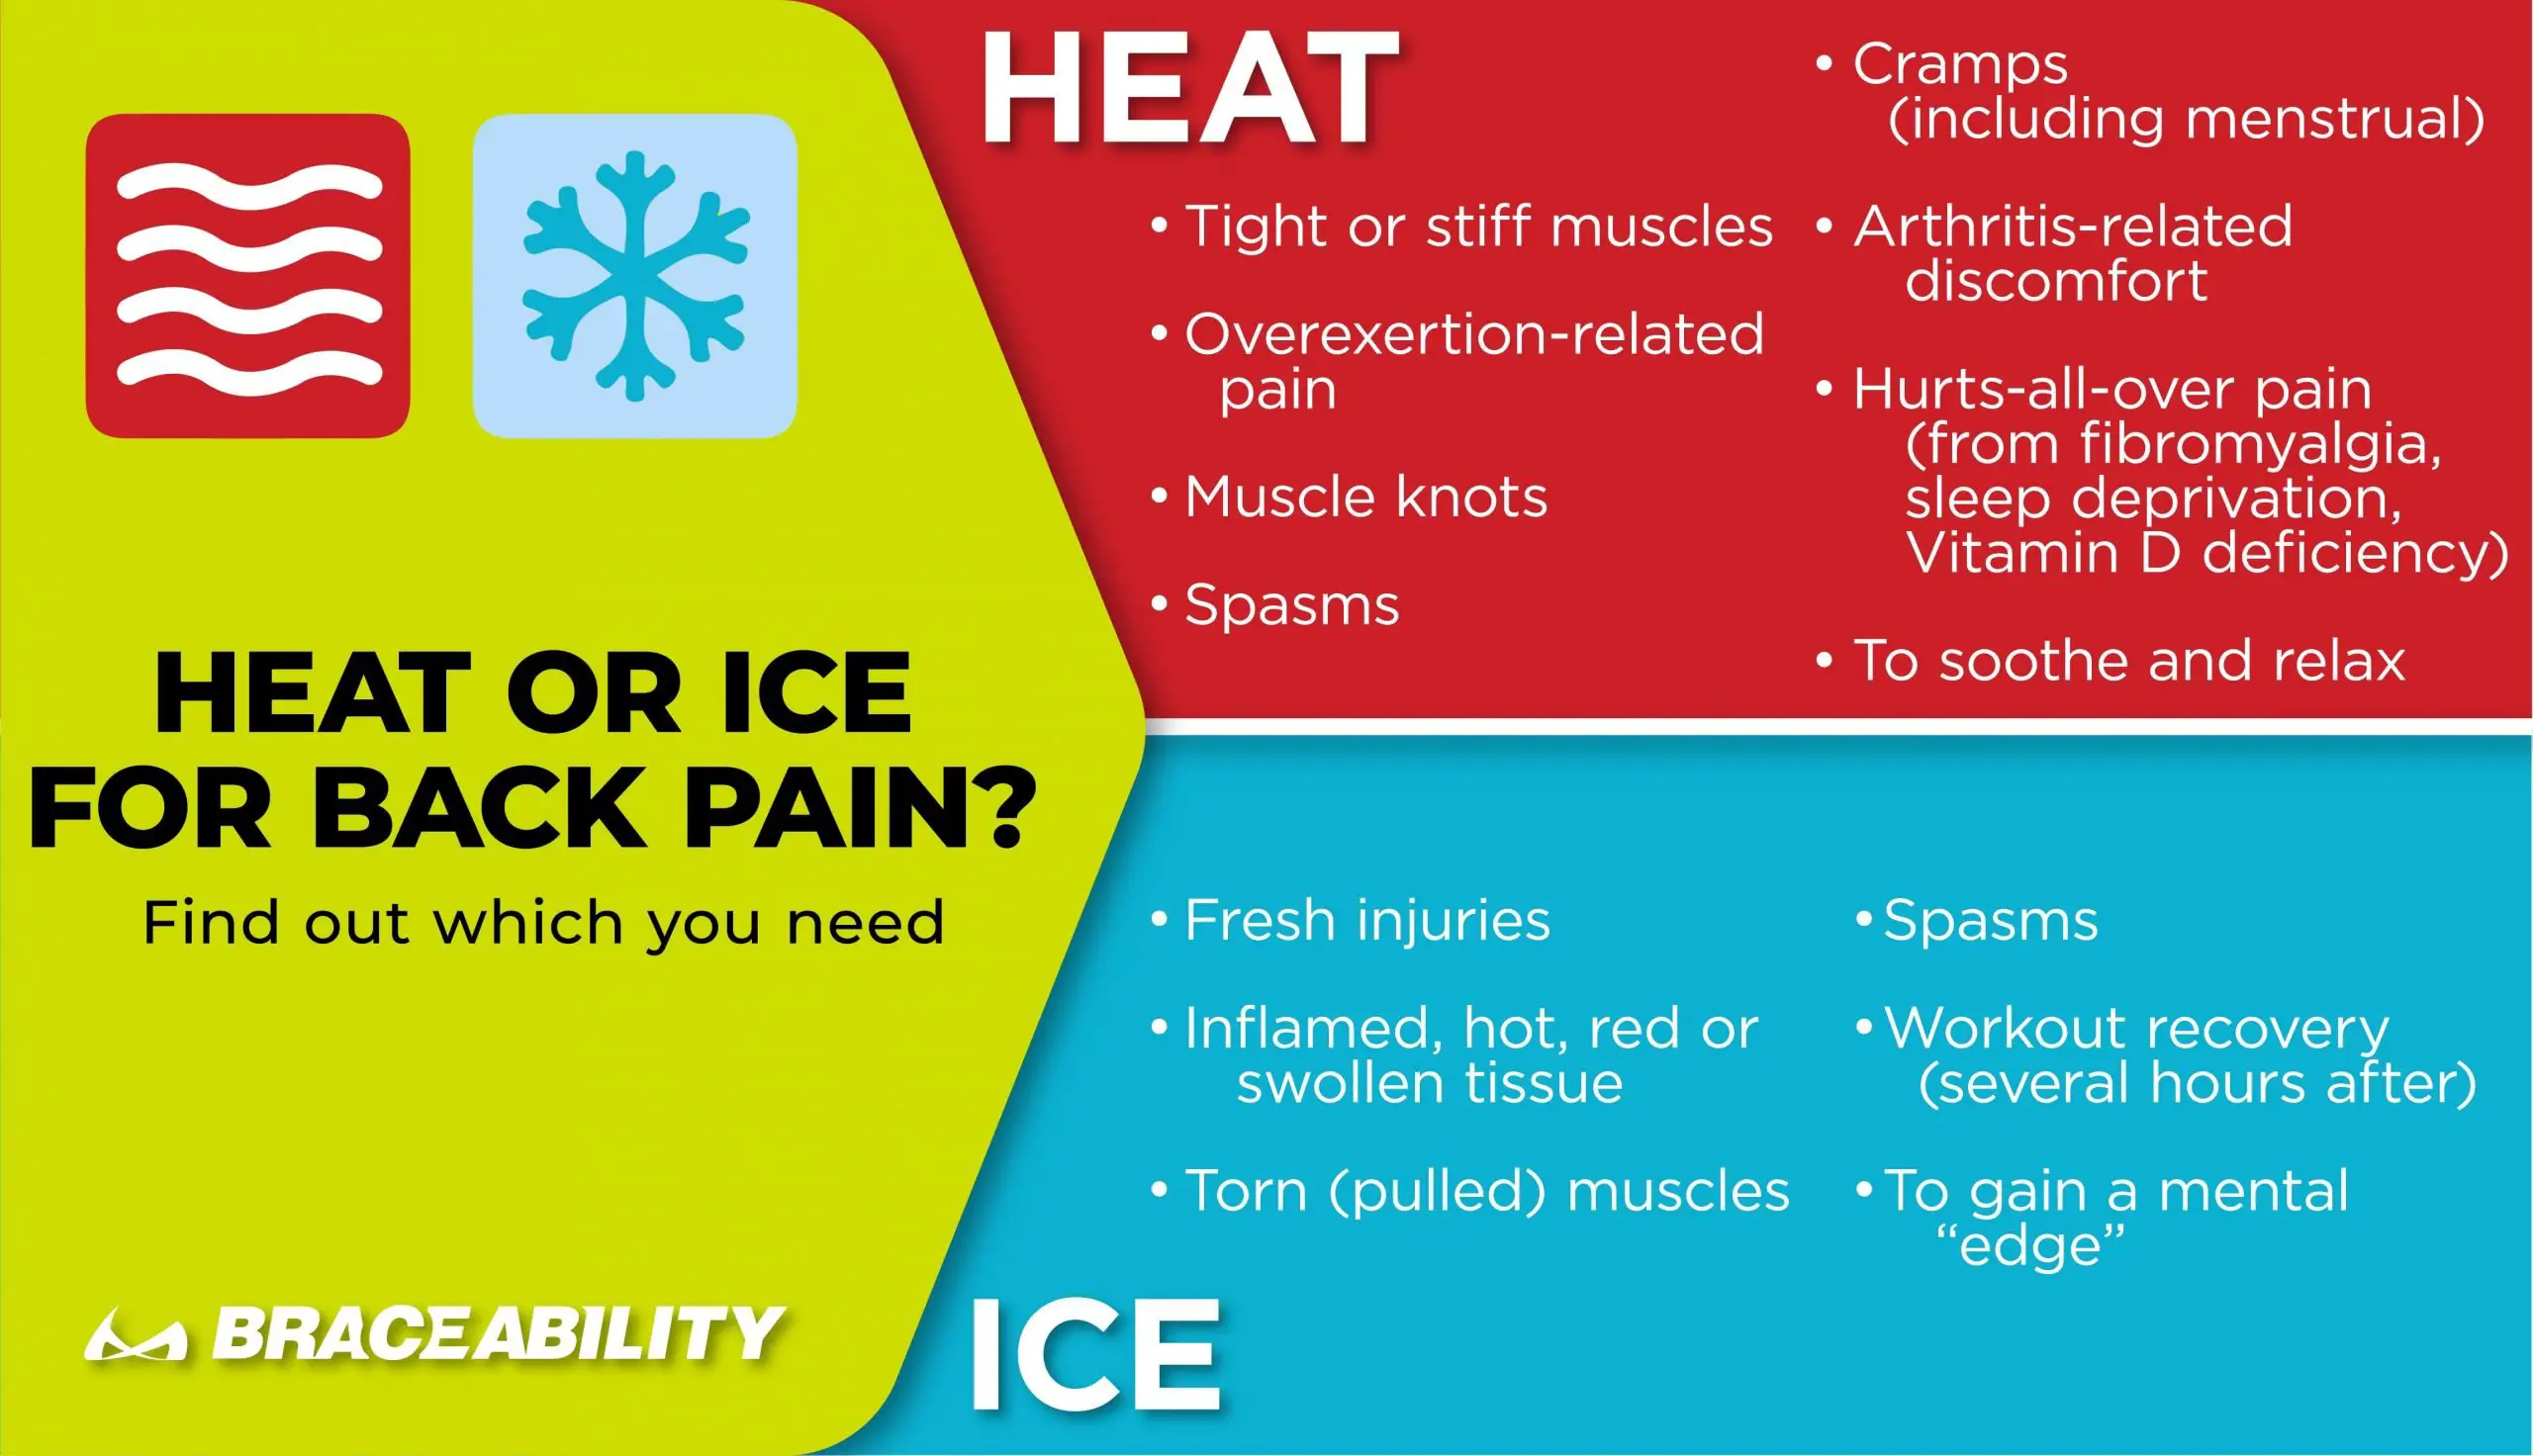 Is Heat or Ice Better for Getting Rid of Lower Back Pain and Tightness?